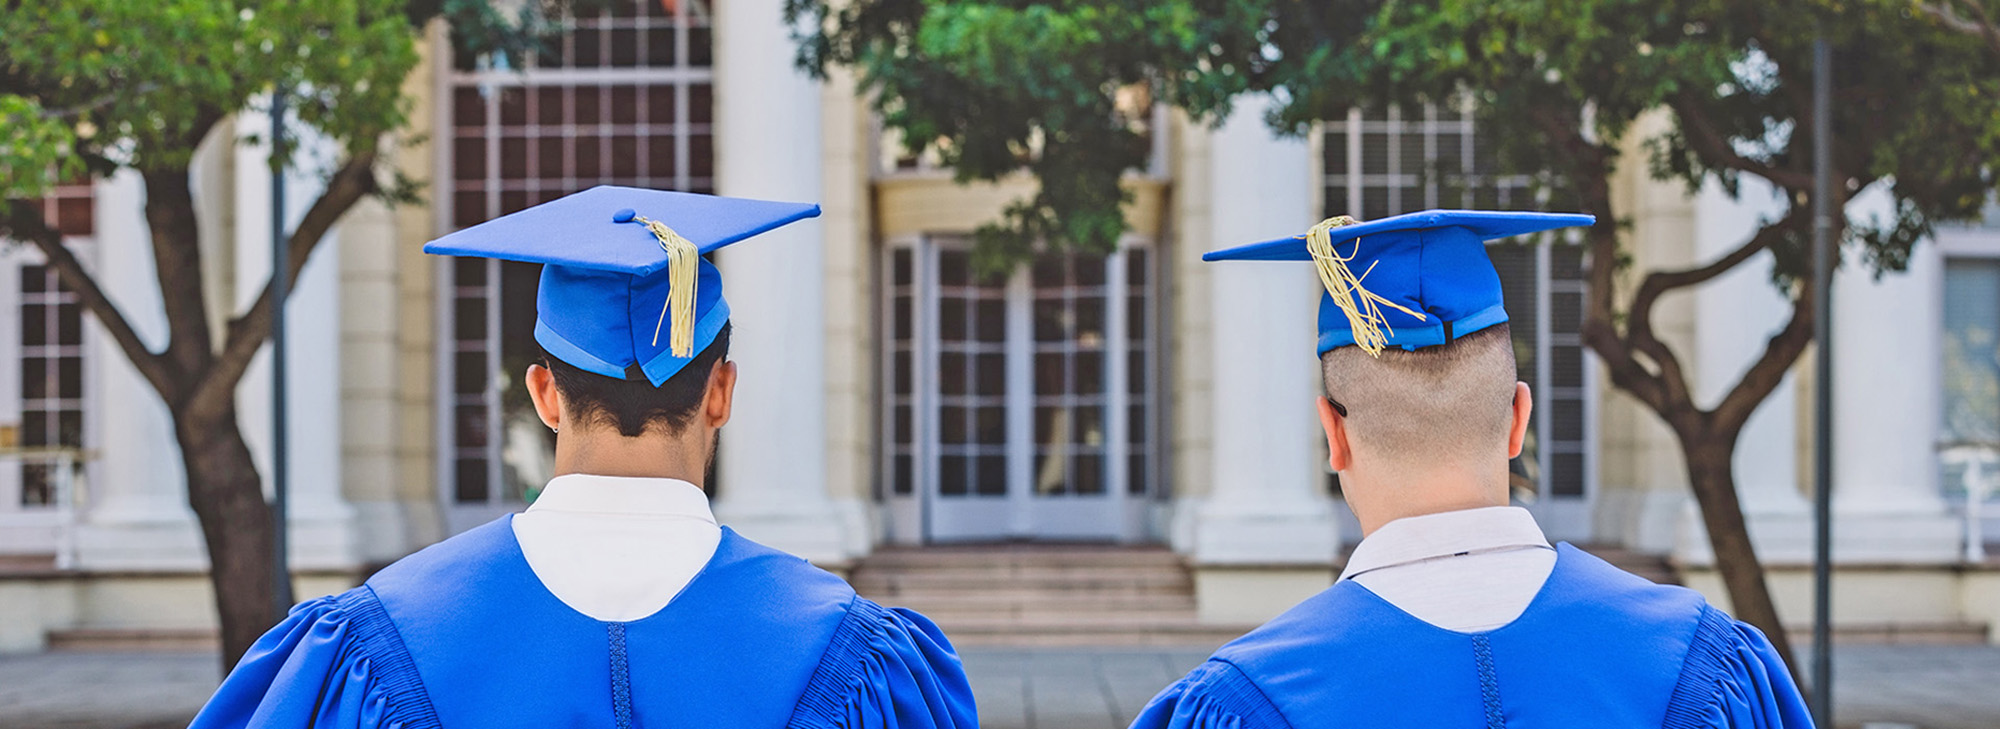 Rearview shot of two young men on graduation day